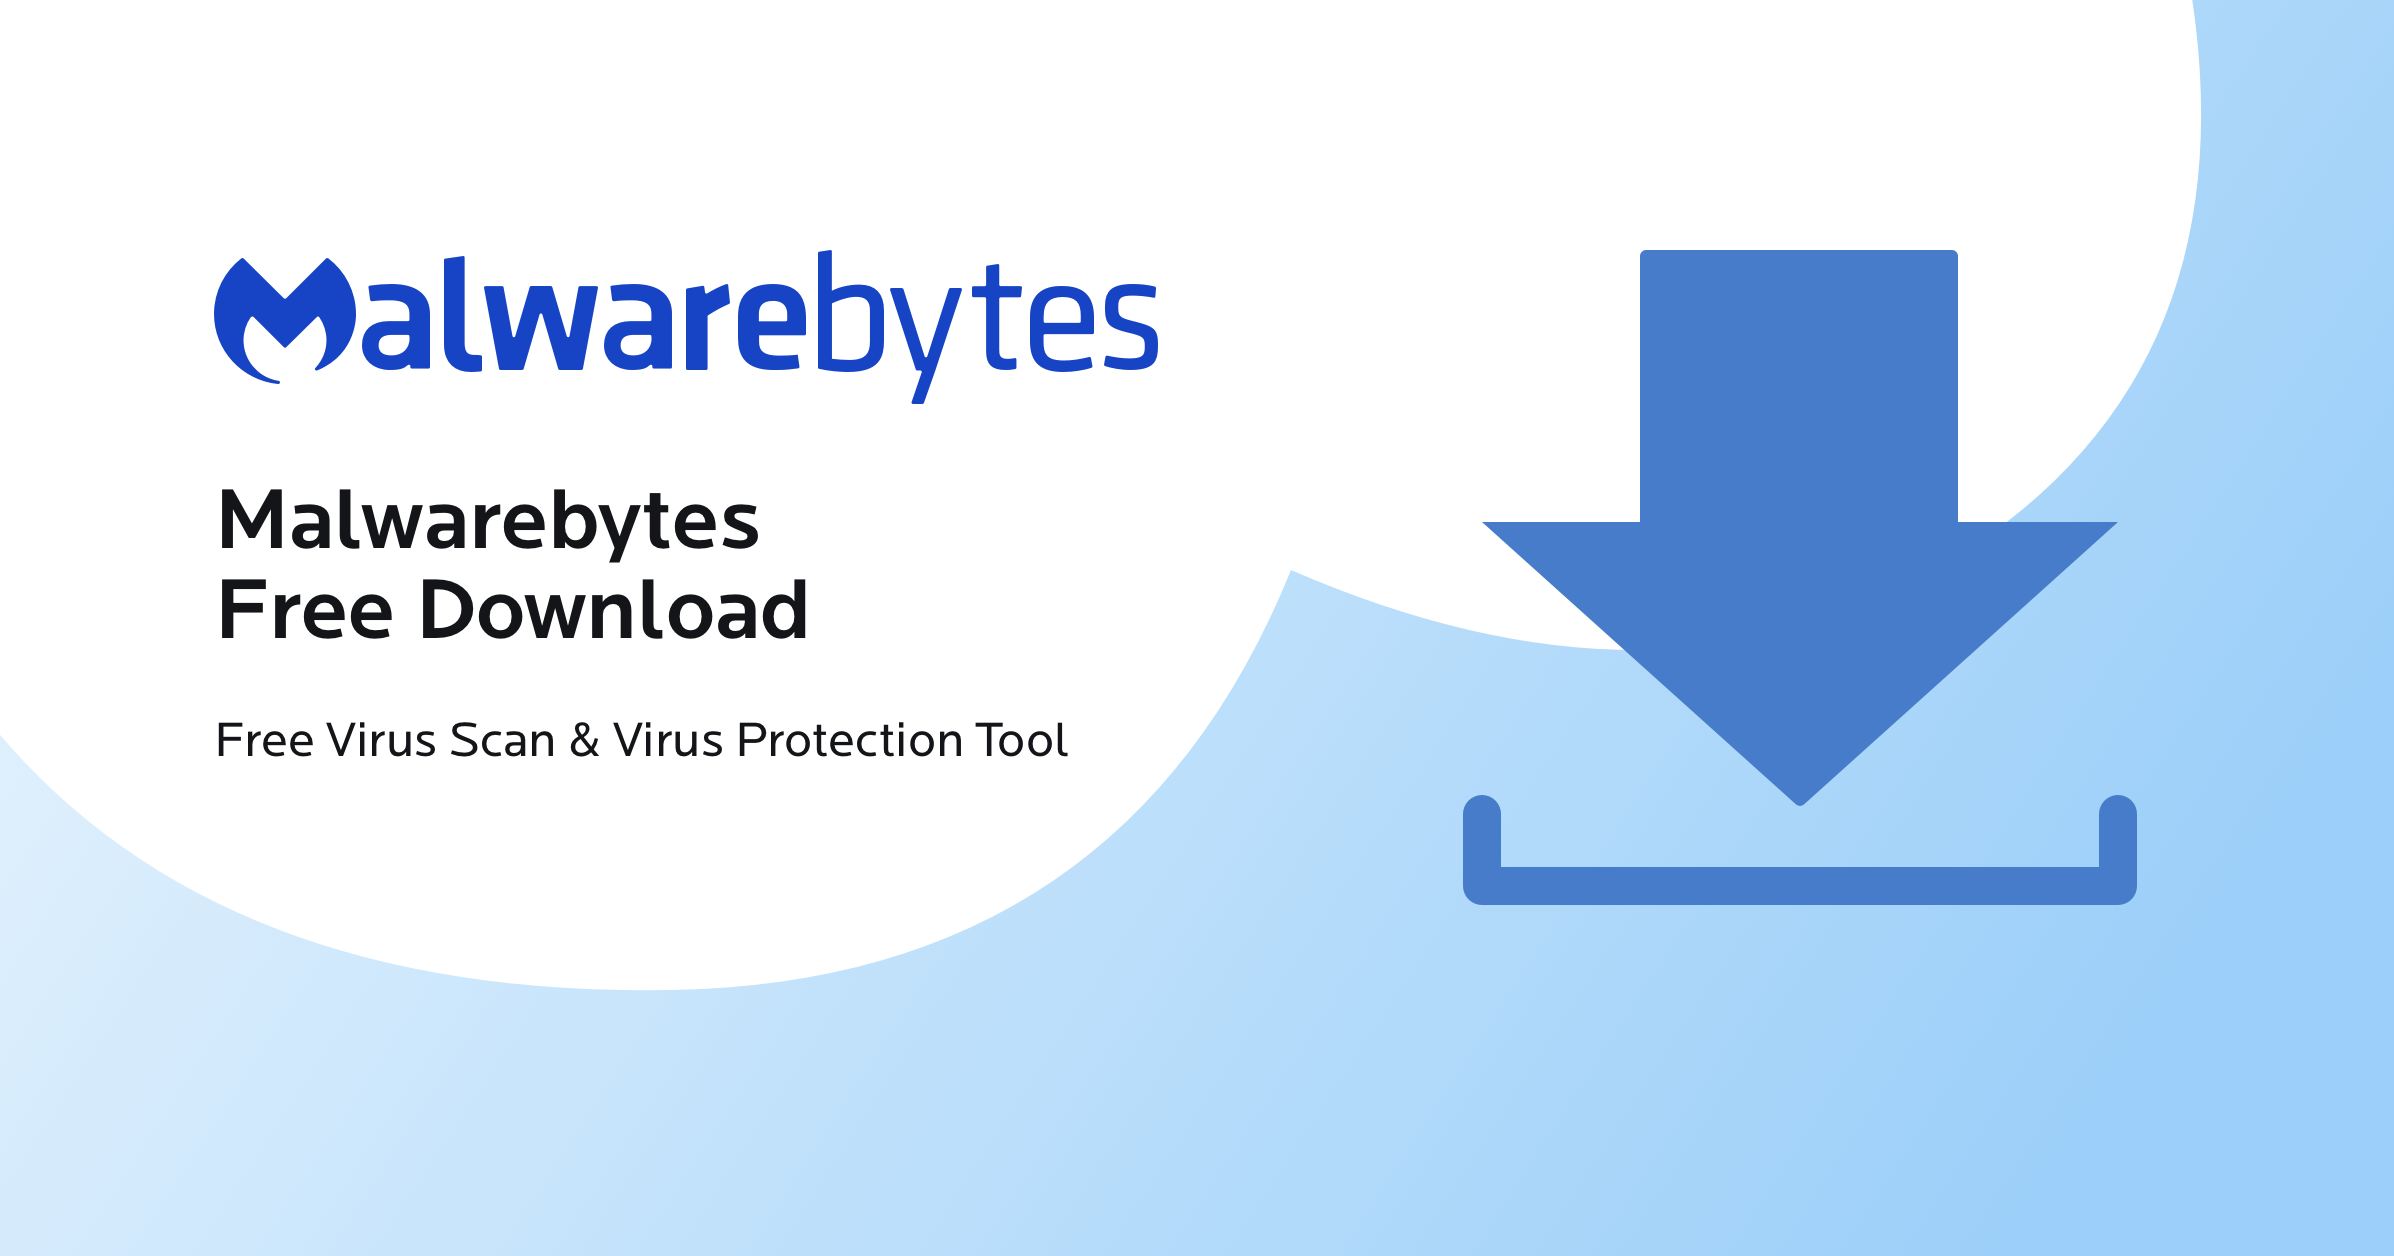 Download and install a reputable anti-malware tool such as Malwarebytes
Open the anti-malware tool